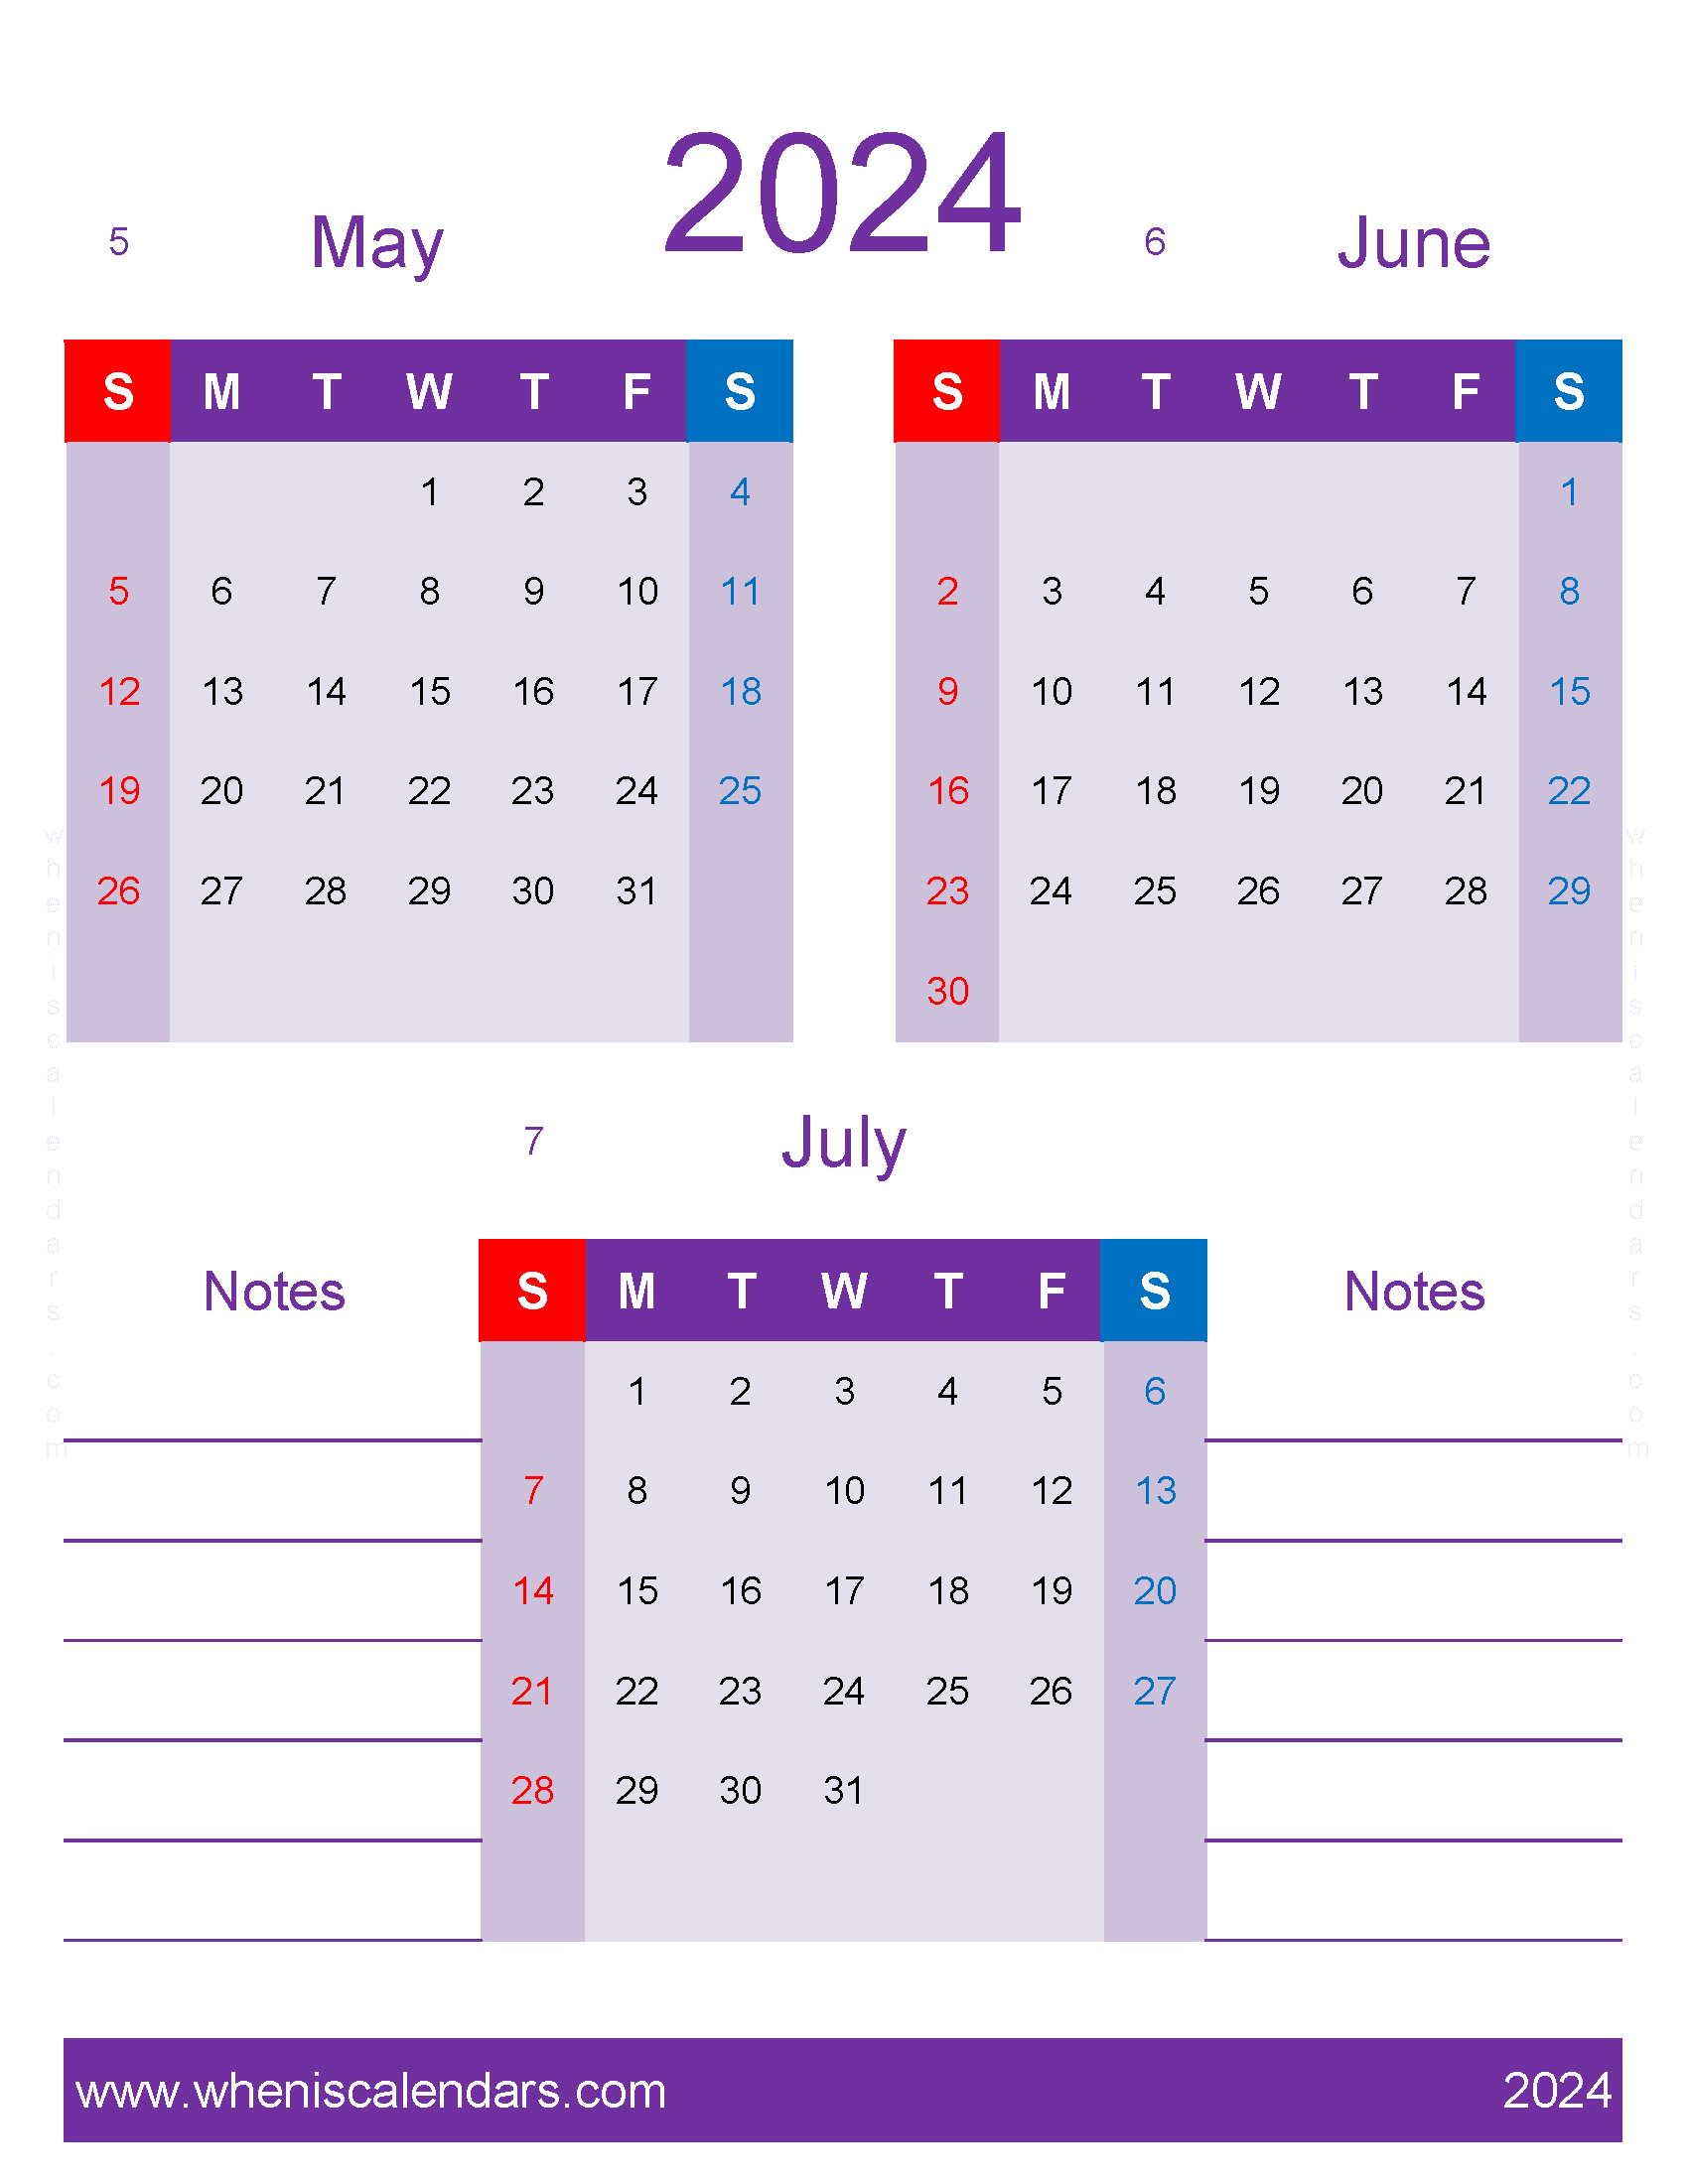 Download Calendar May to July 2024 free MJJ476